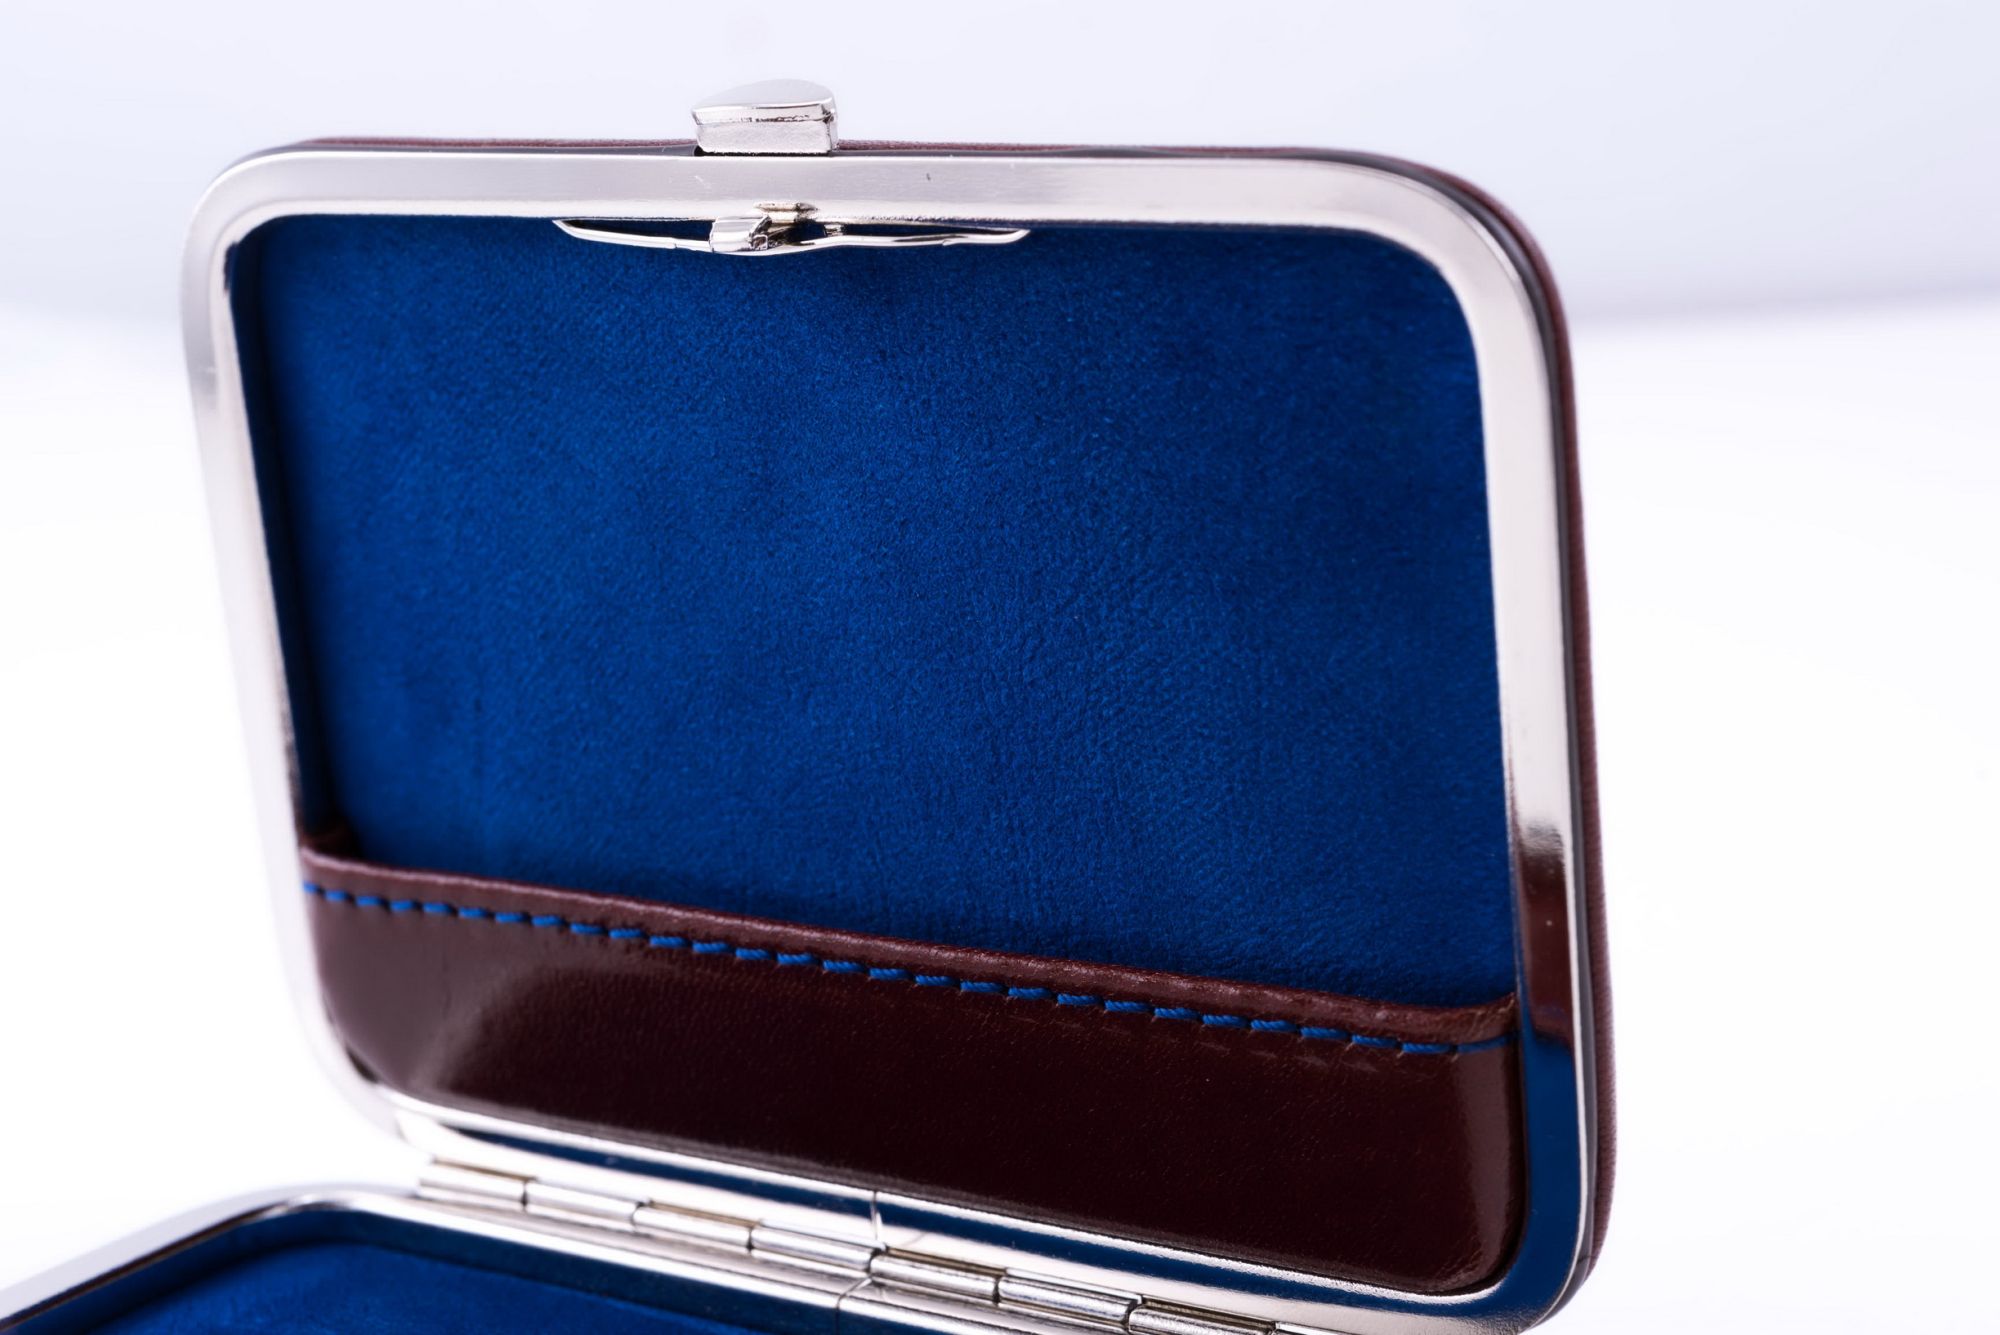 A beautiful, leather envelope-shaped business card holder - Absolute Breton